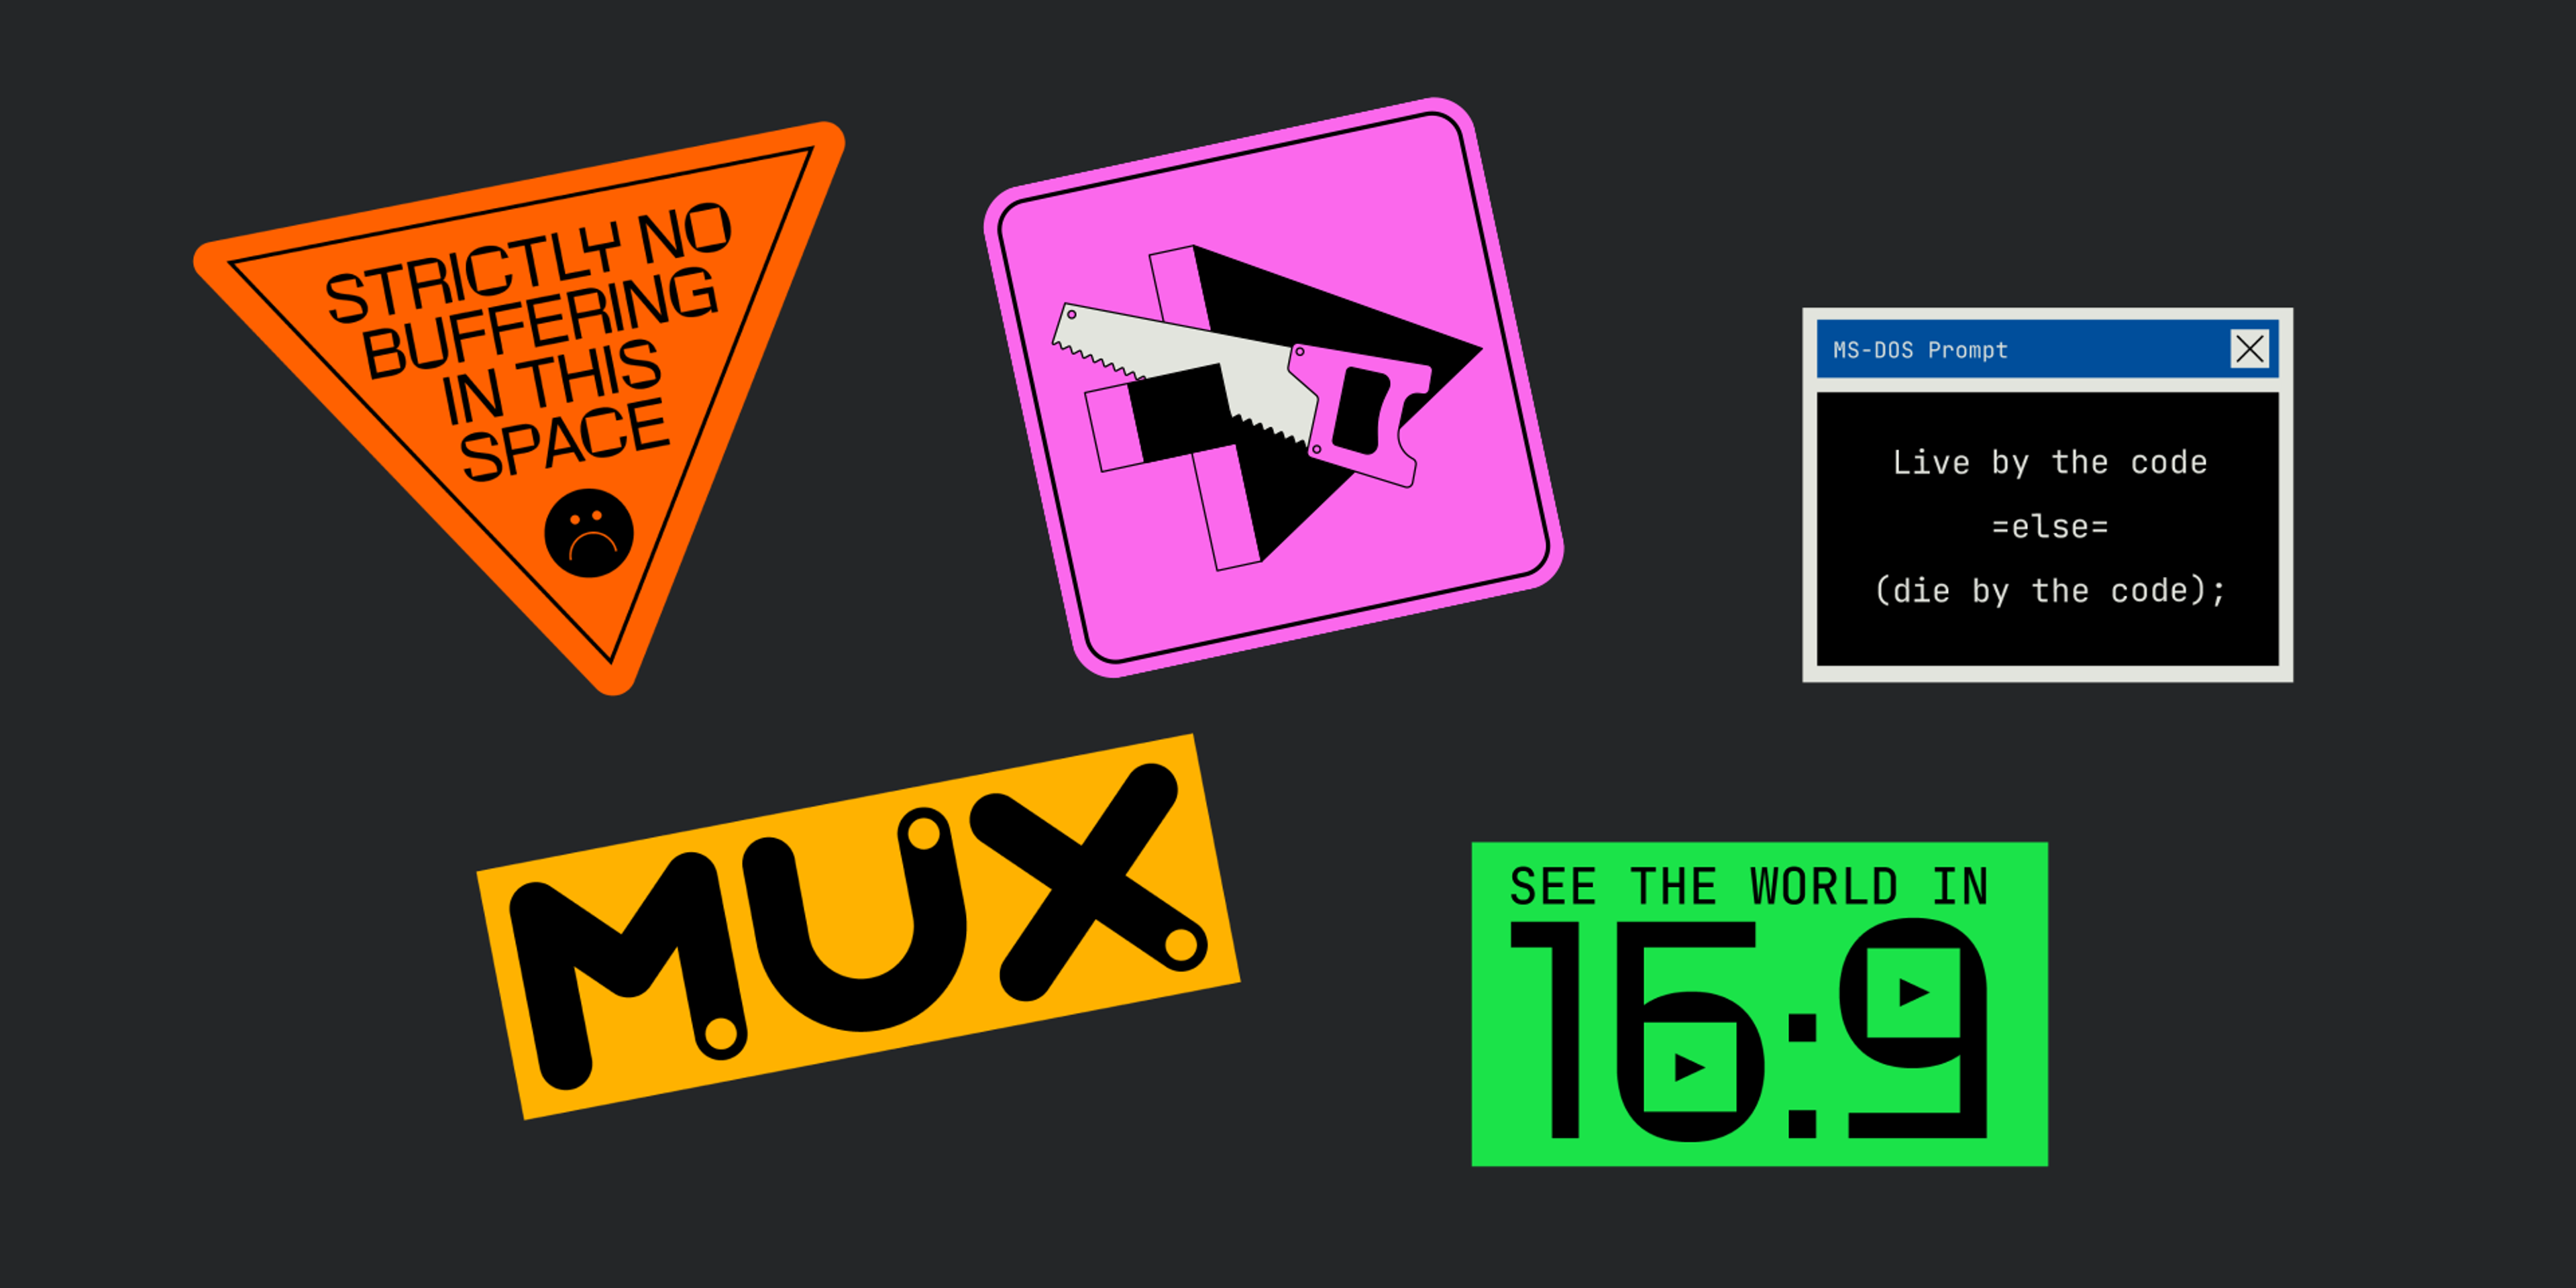 A collection sticker mockups created using the new Mux branding.